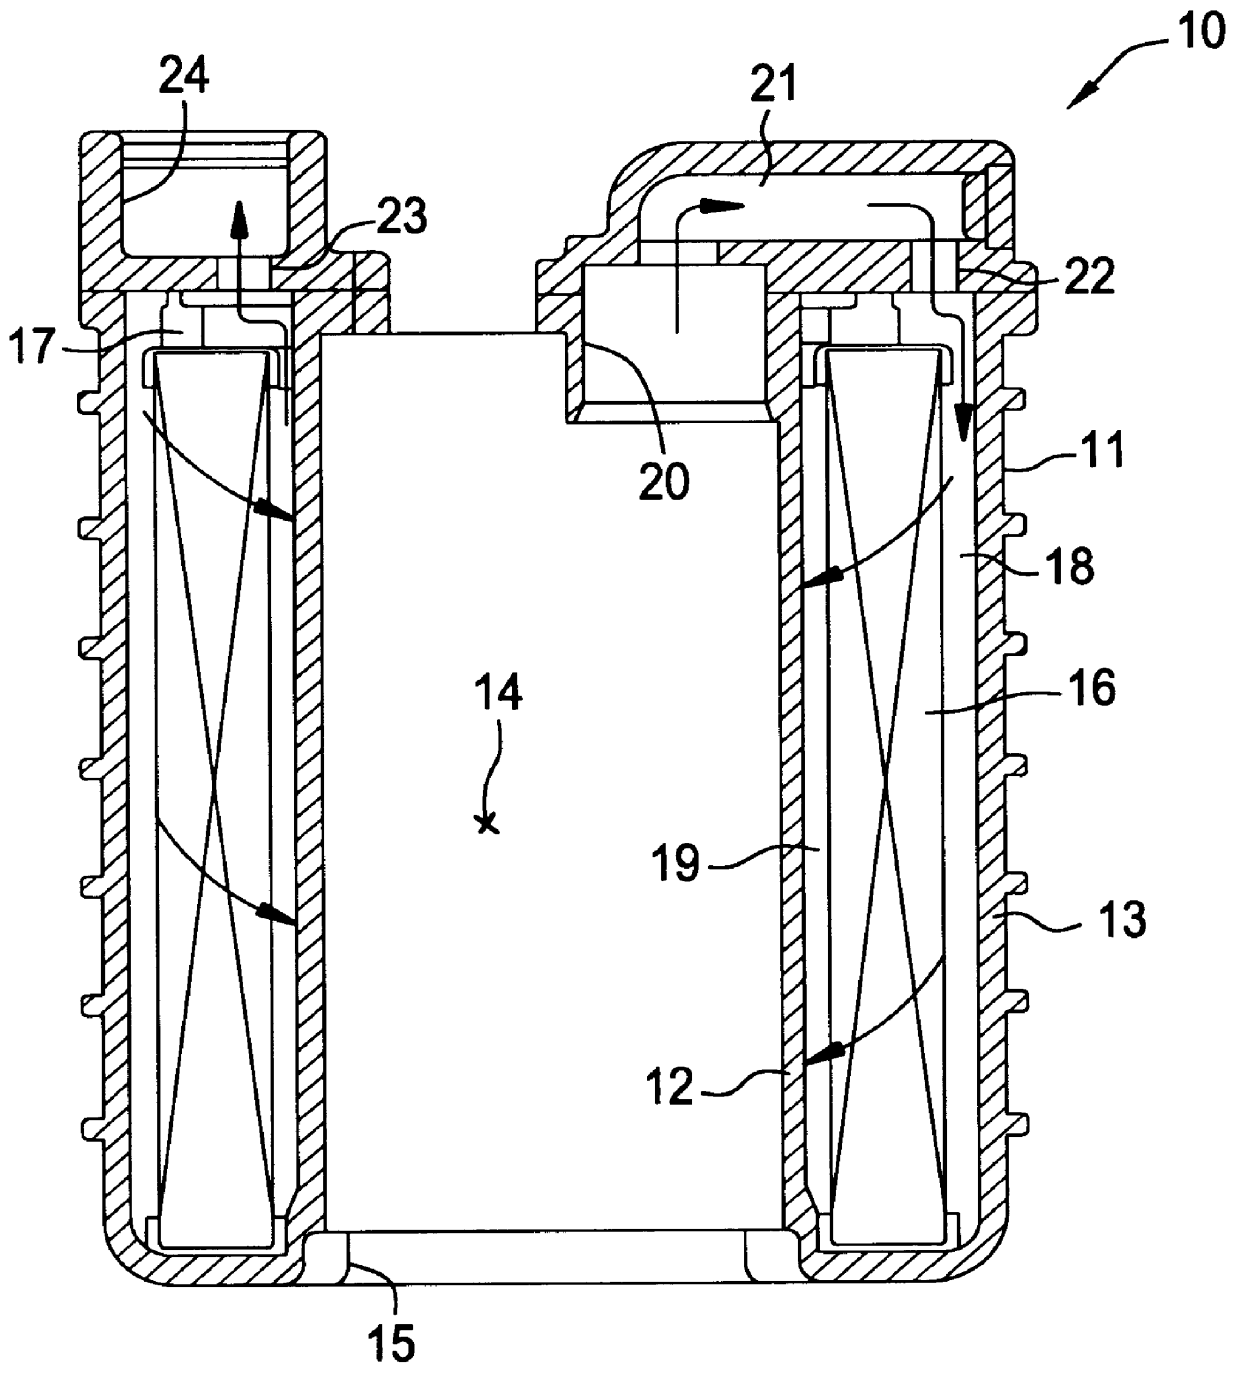 Fuel filter with return path for reducing electrical charge buildup